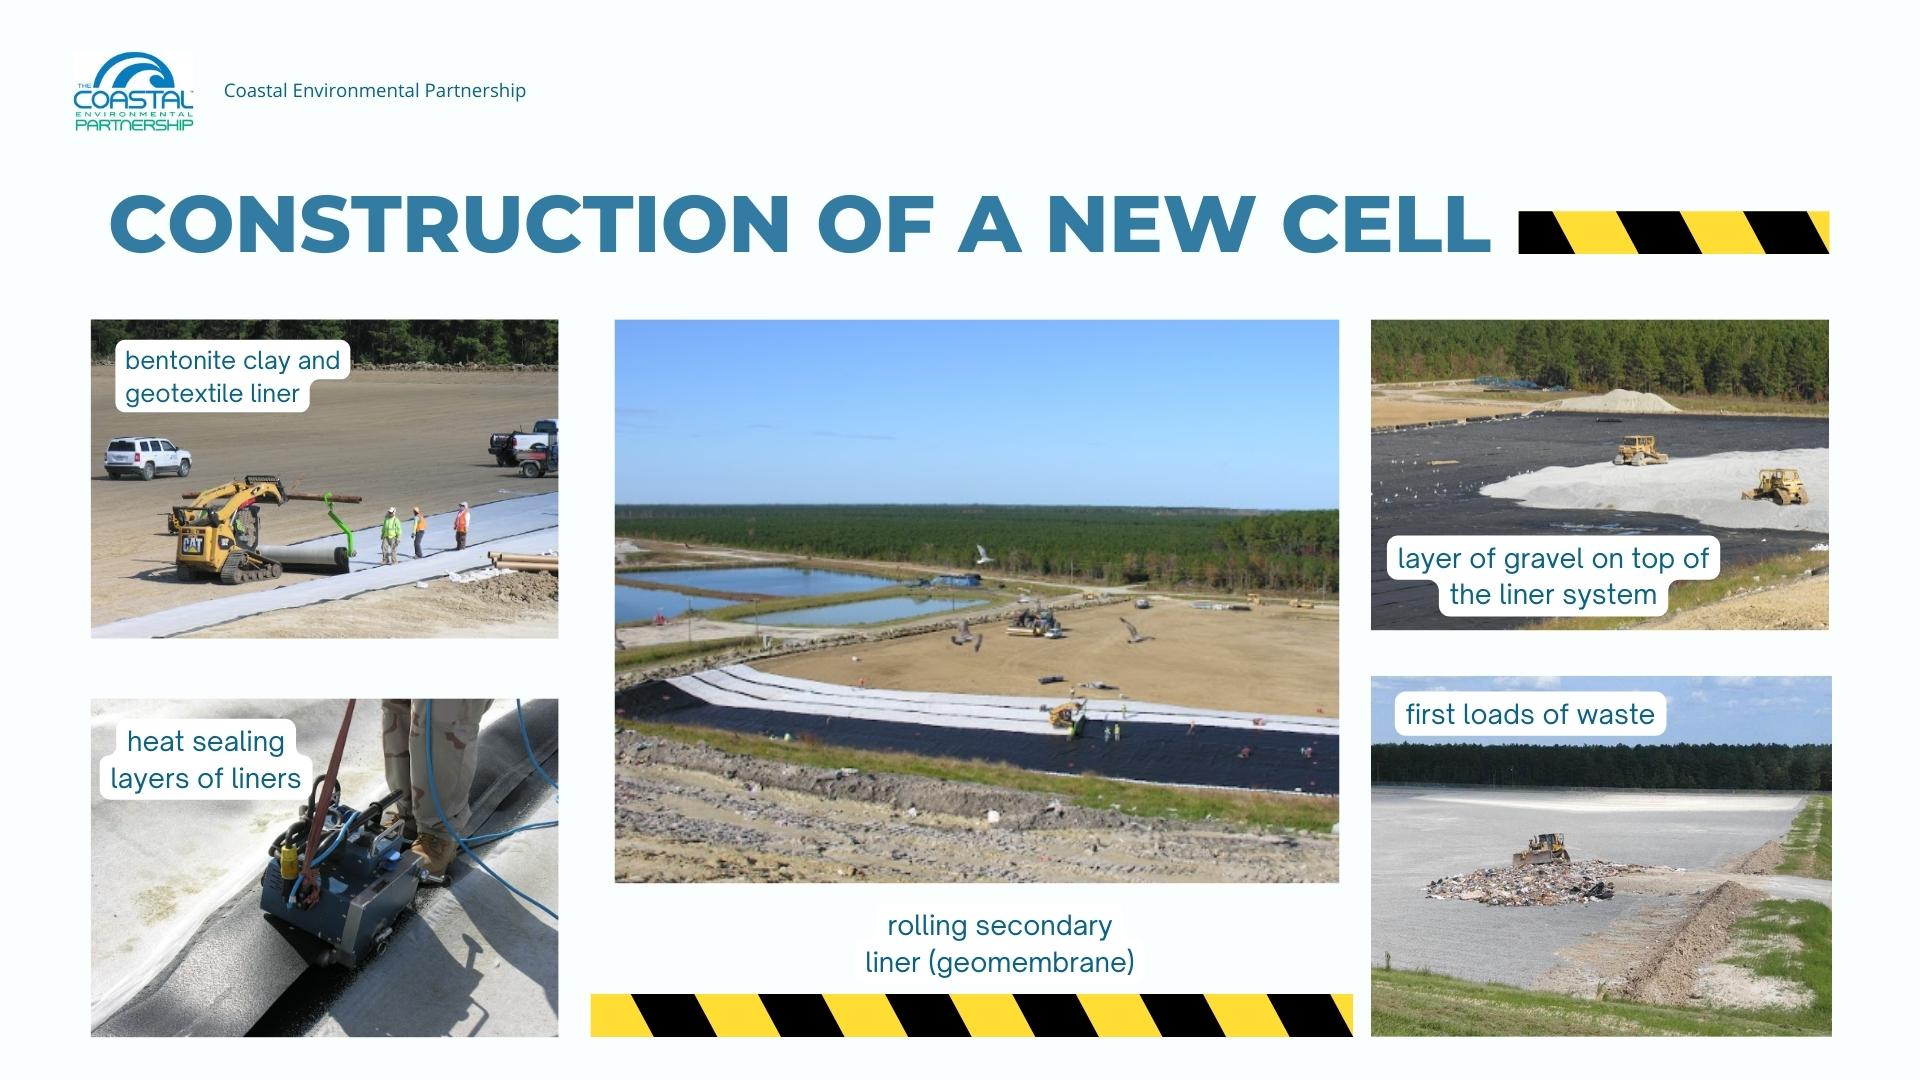 Images of constructing a new landfill cell.